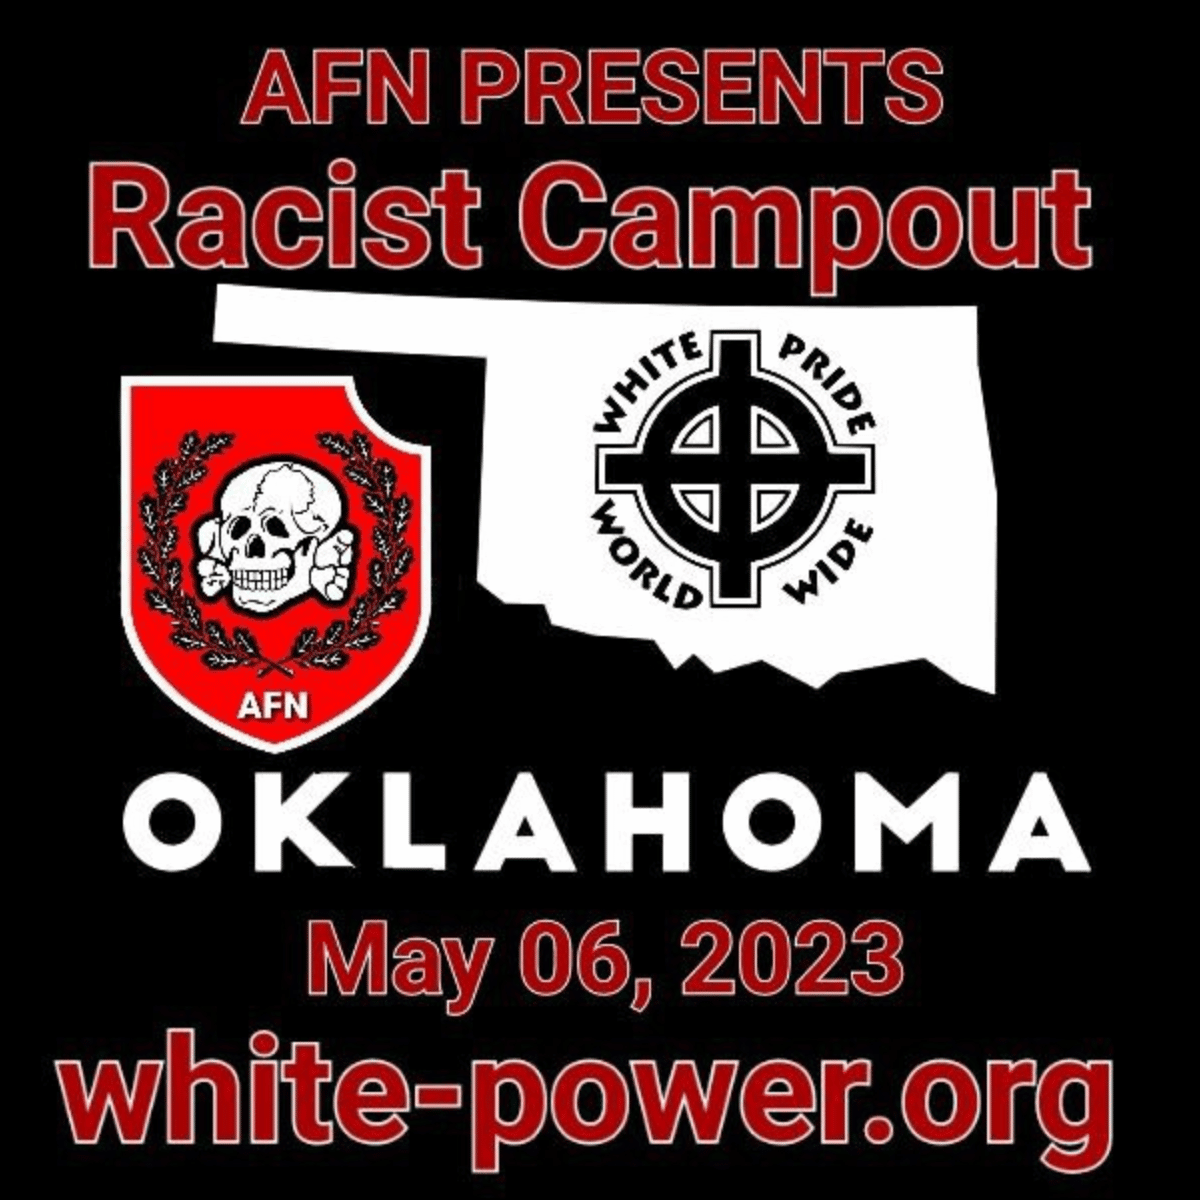 (Right Wing Extremism / Poster) Aryan Freedom Network (AFN) Host 6 May 2023 'Racist Campout' in Oklahoma, United States - 19 January 2023